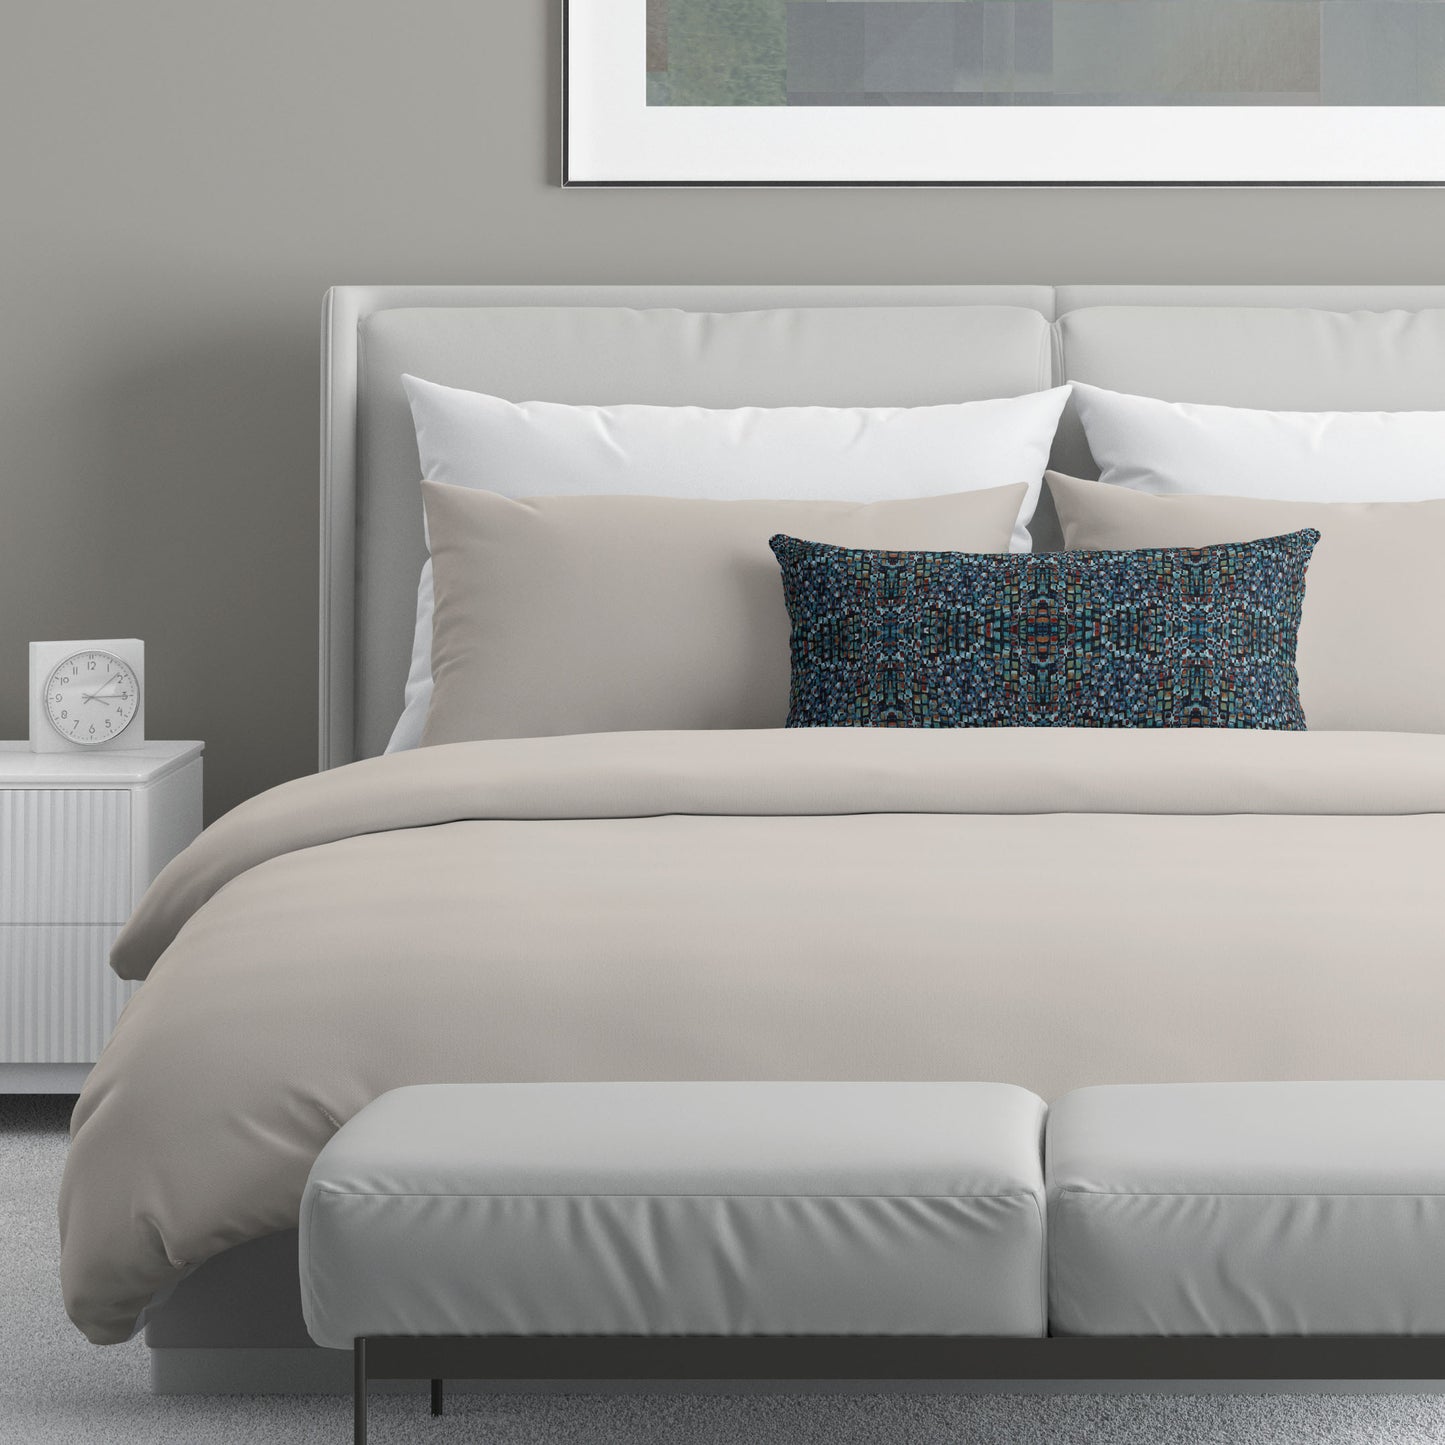 Neutral bedroom scene featuring a blue abstract pattern lumbar pillow